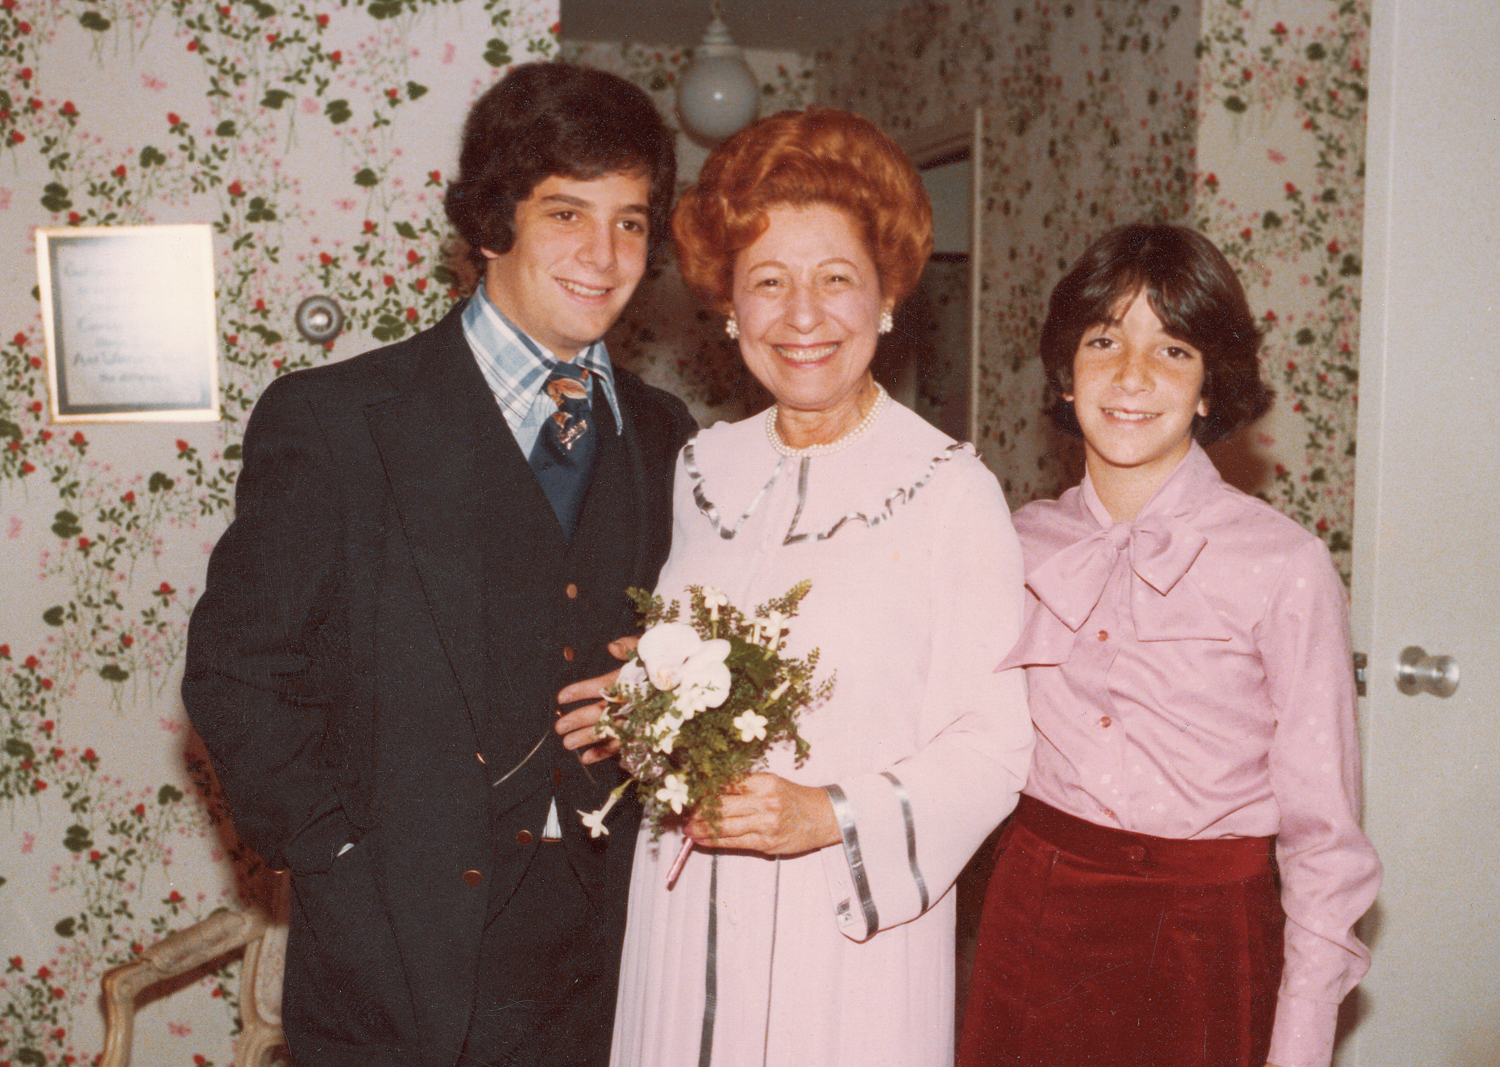 My children, Barry and Alison, at Mother's wedding in 1978.